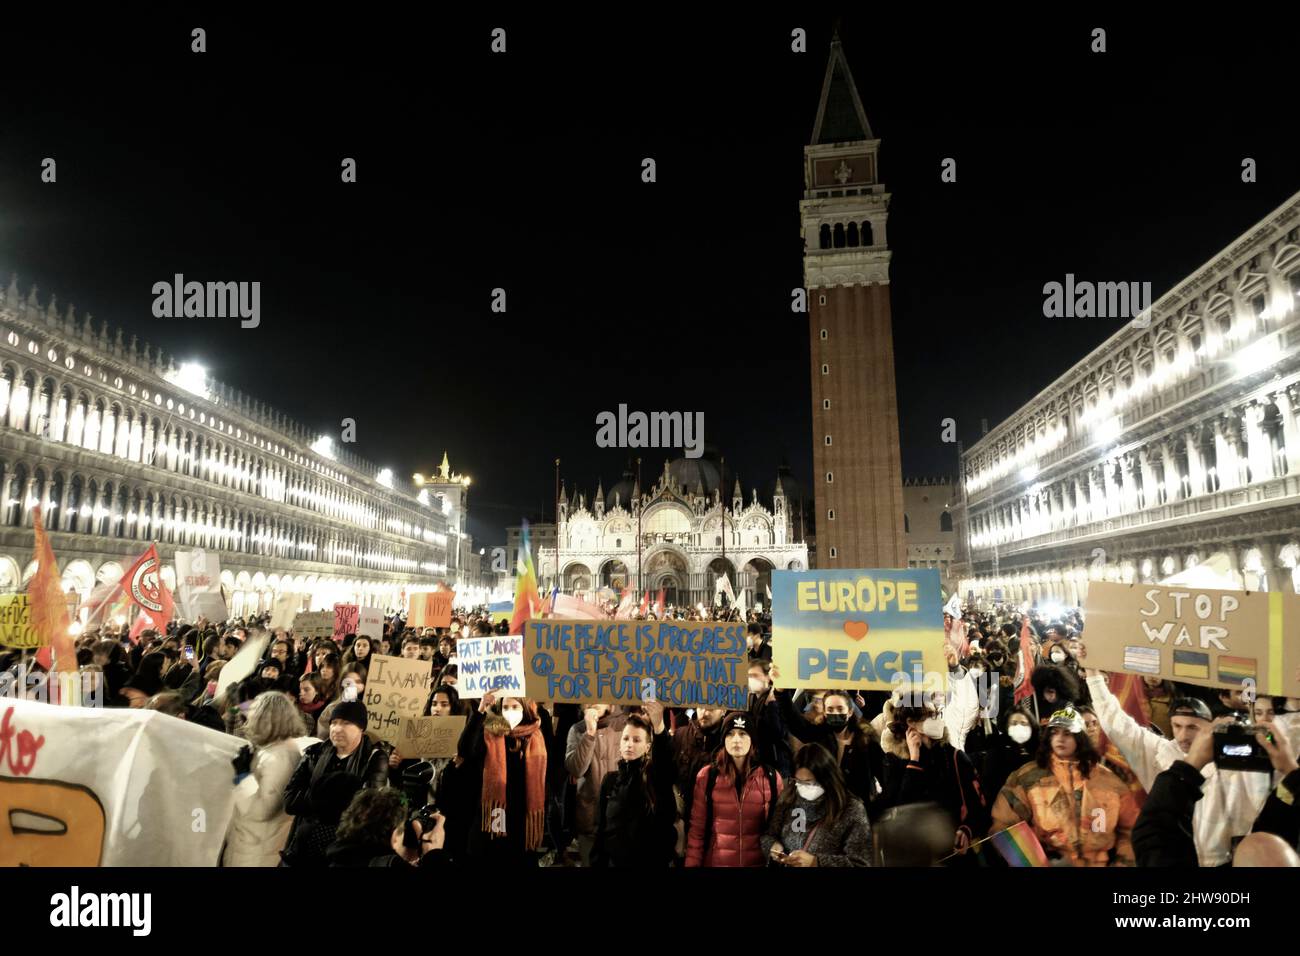 People demonstrate at St. Mark's square against Russia's invasion of Ukraine, in Venice, Italy March 2, 2022. Stock Photo